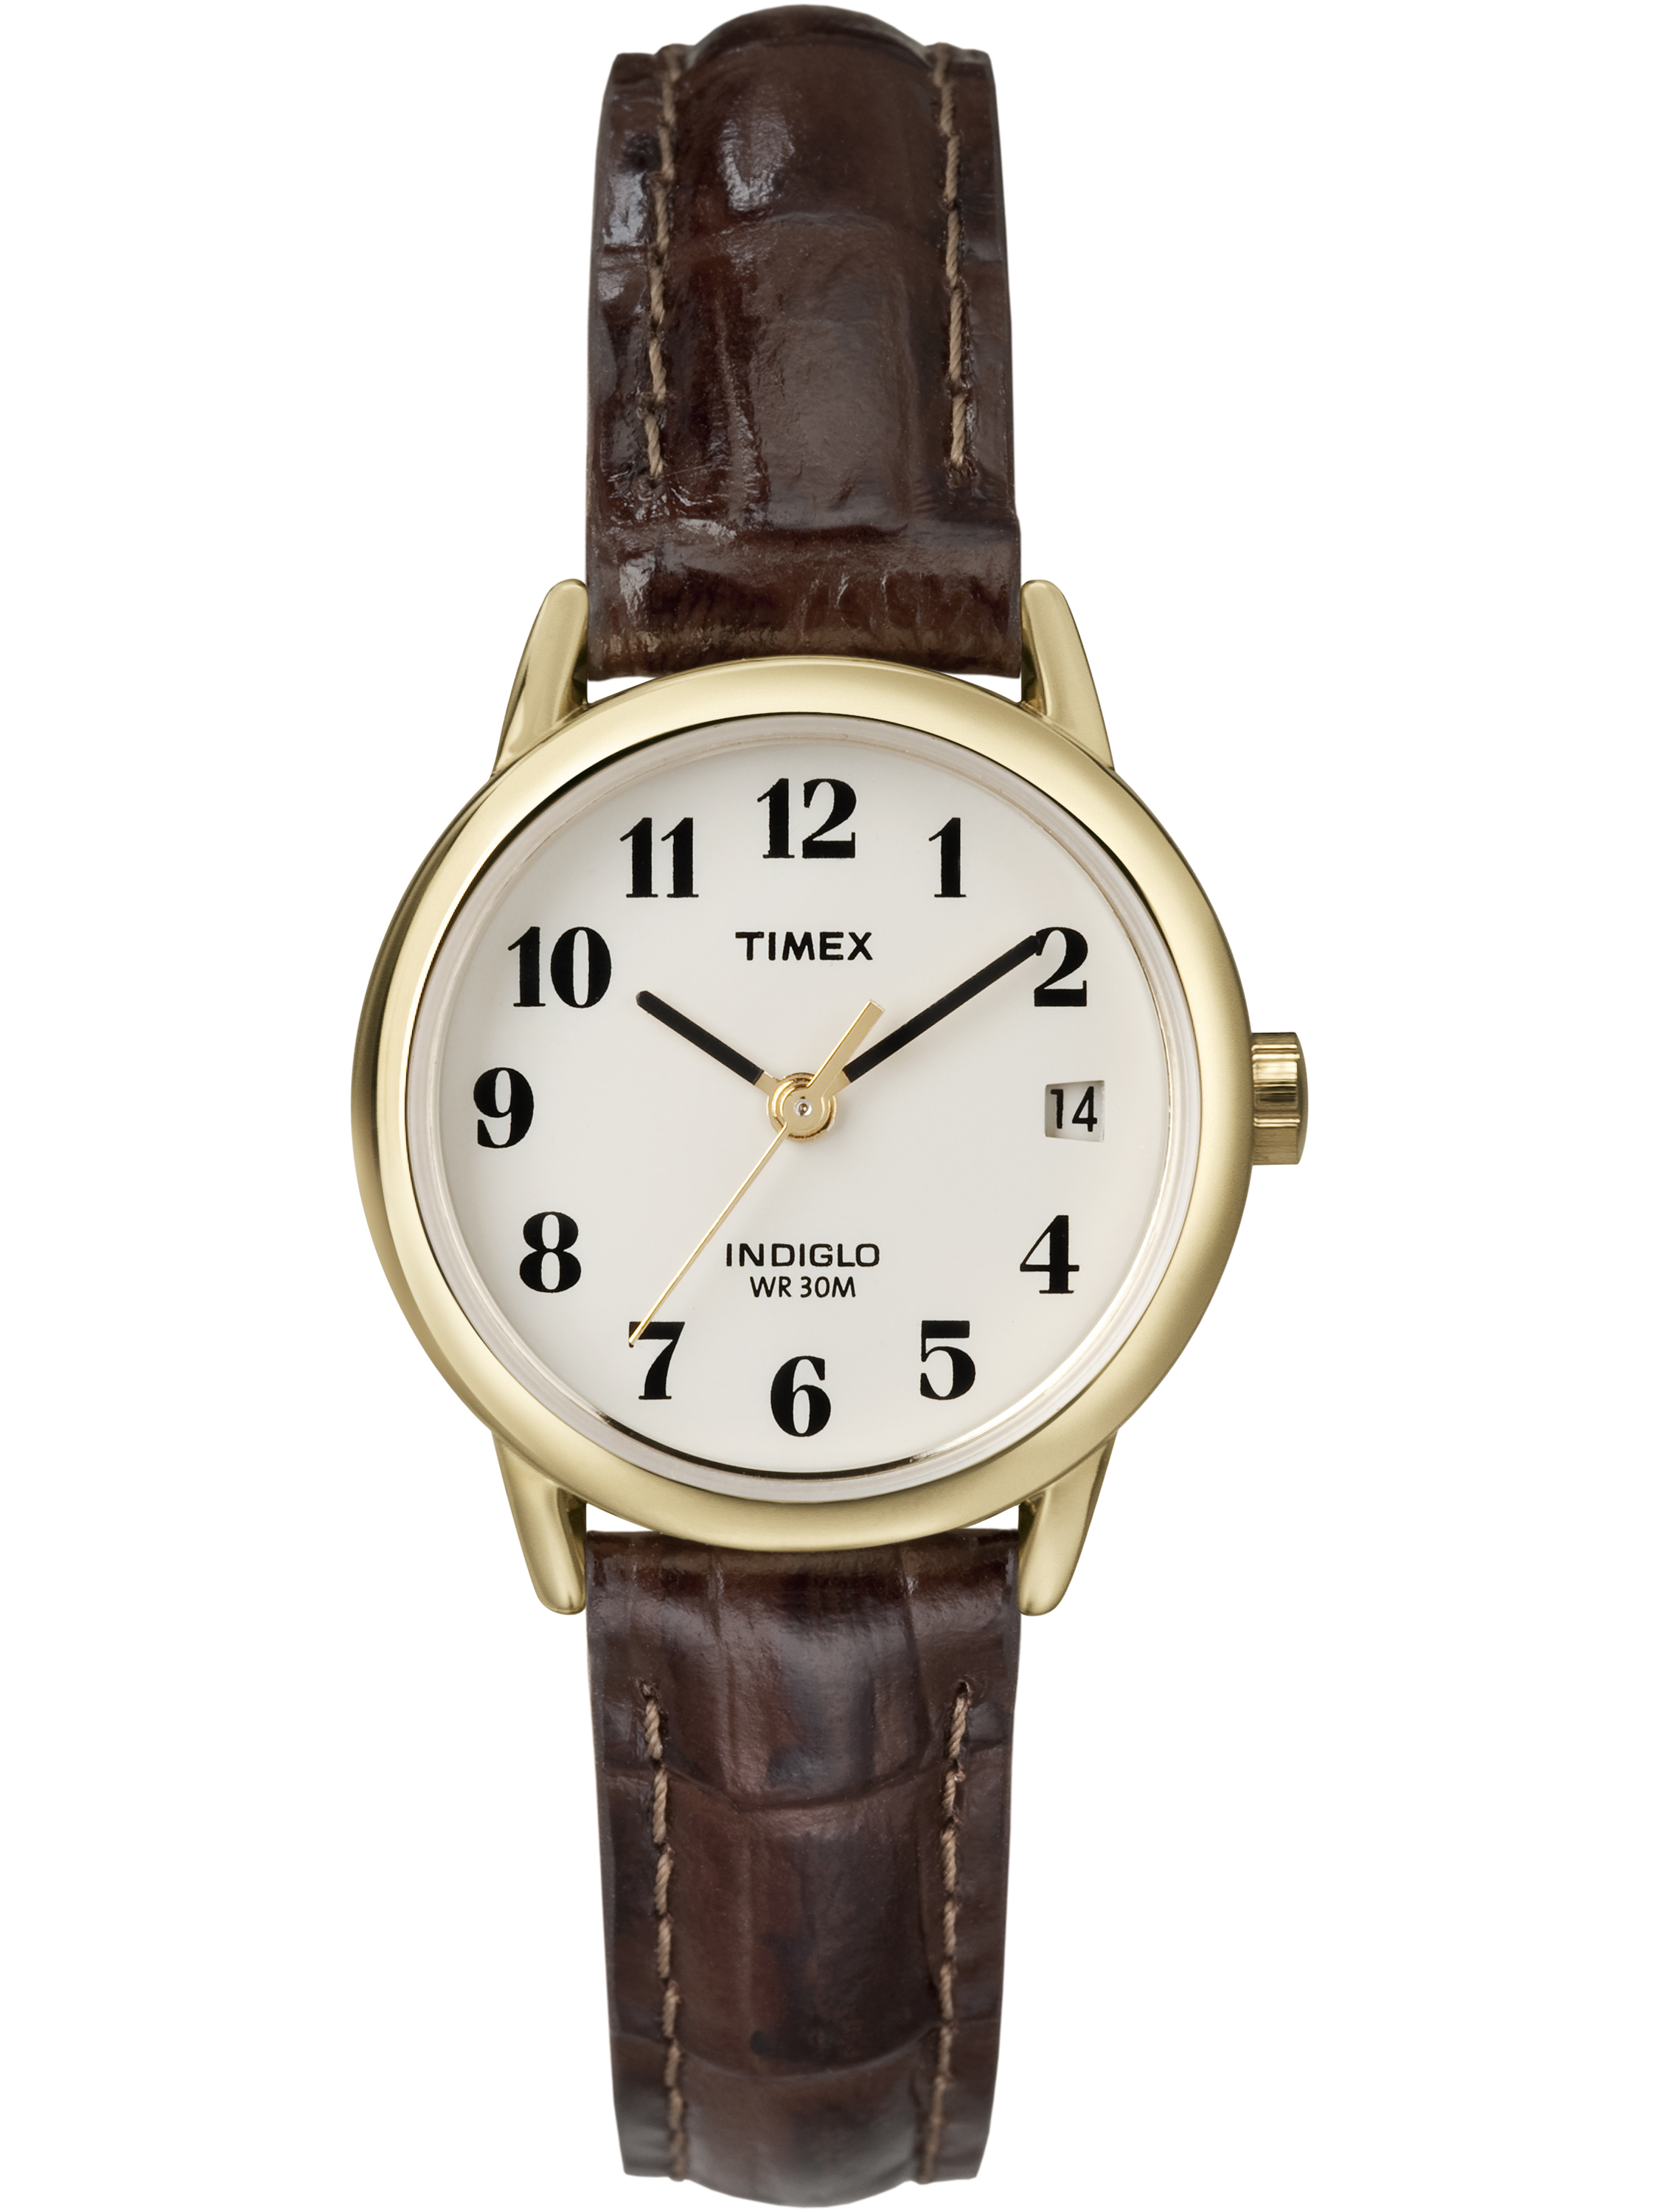 Timex Women's Easy Reader Date Brown/Gold 25mm Casual Watch, Leather Strap - image 1 of 5